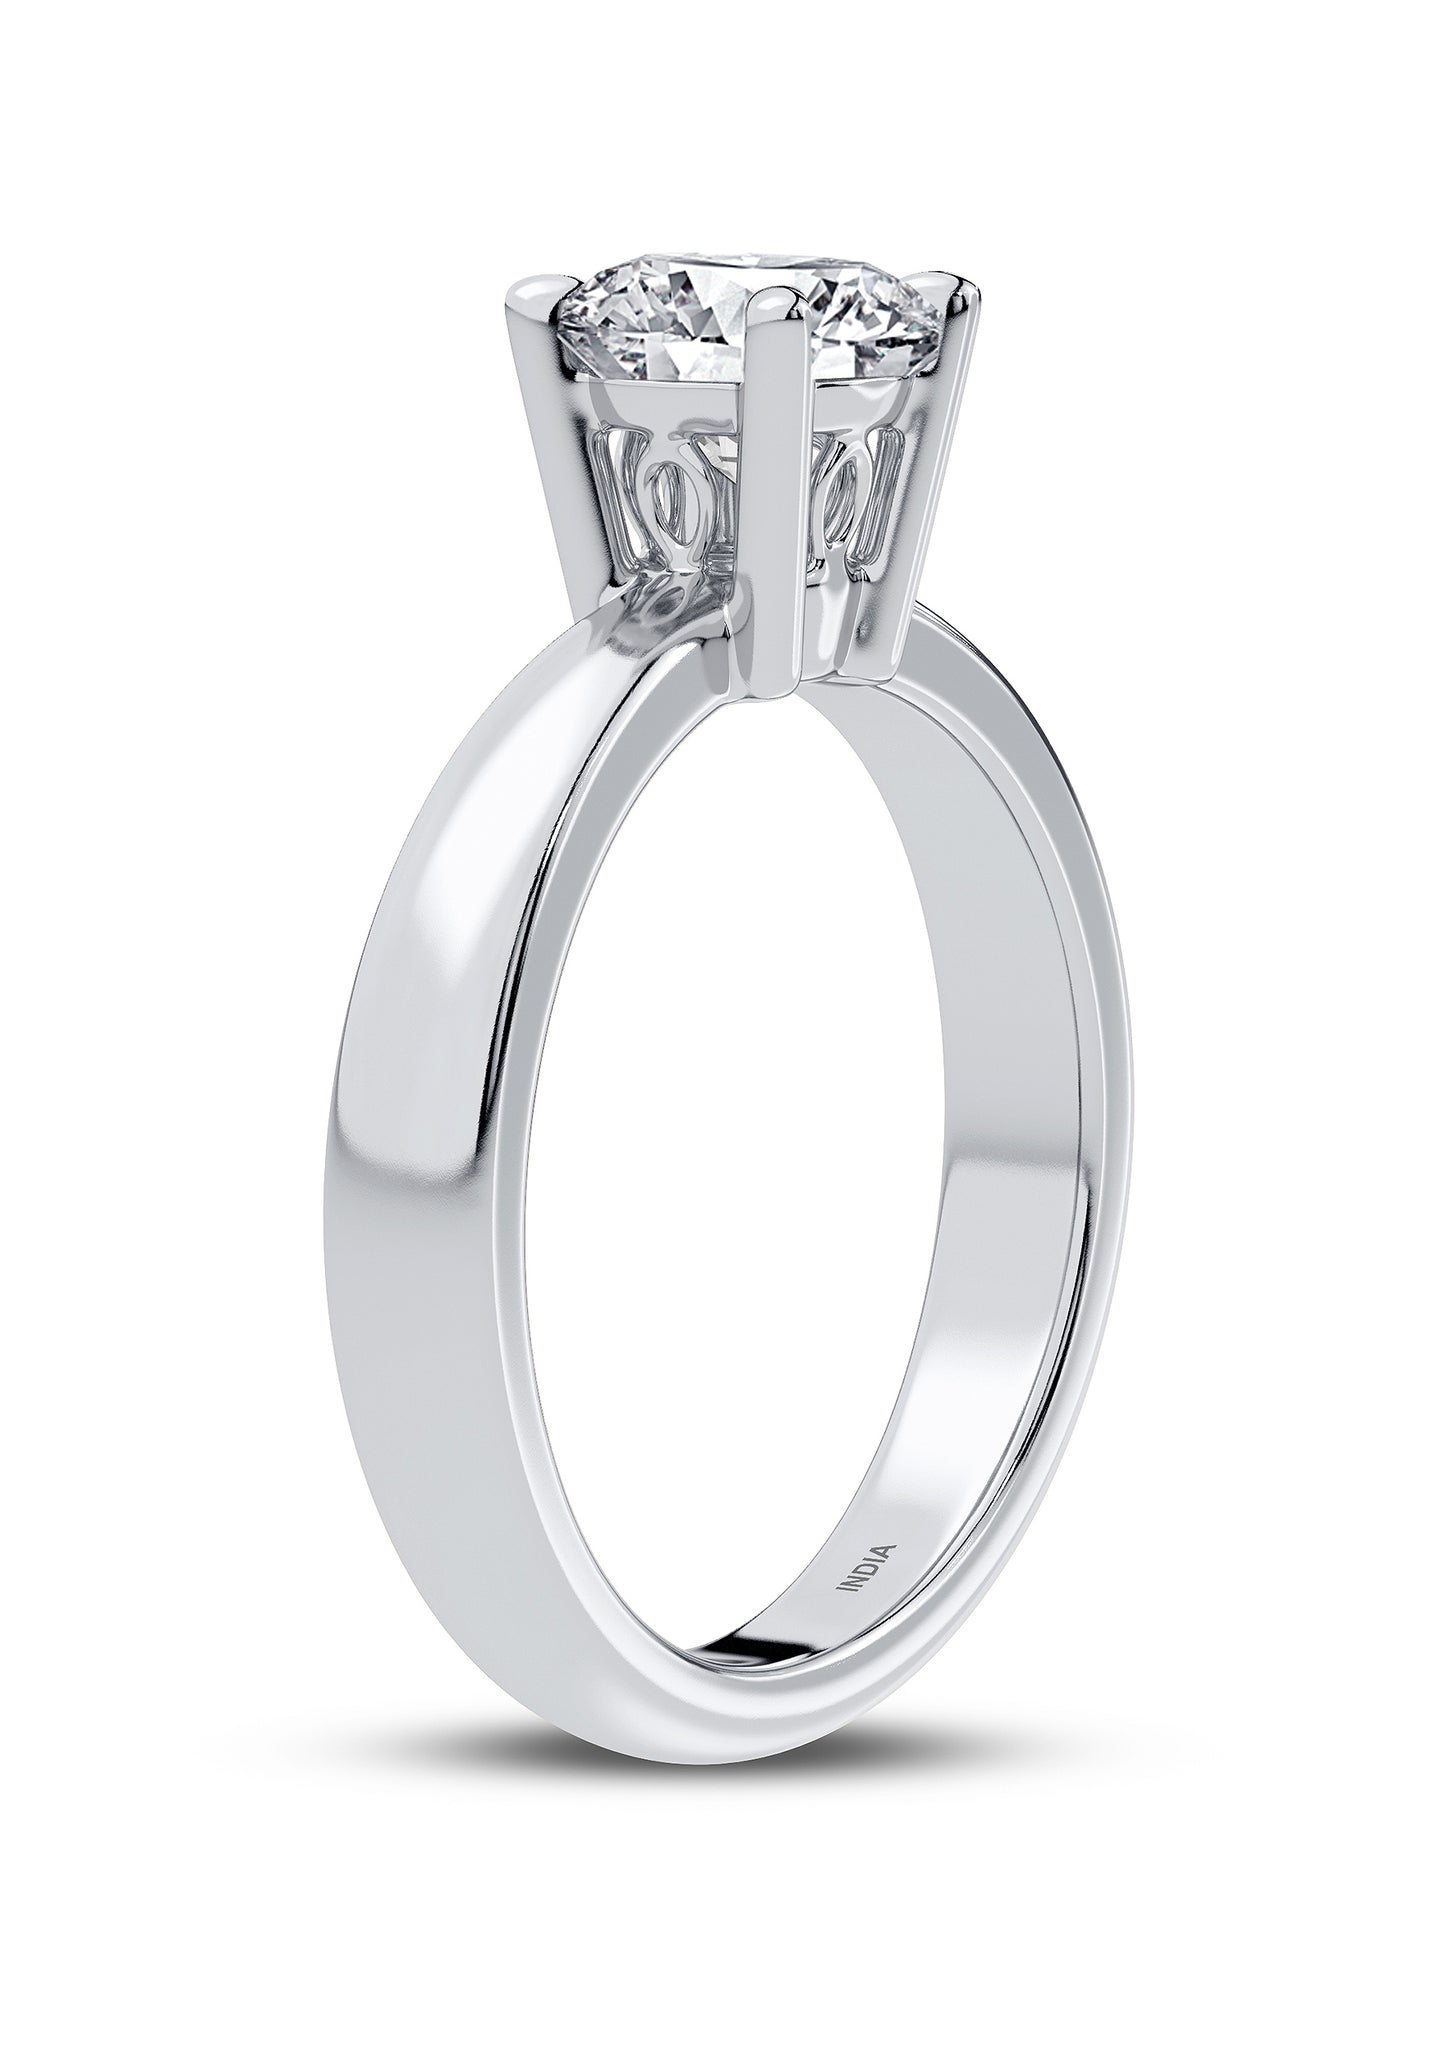 14K White Gold 1.00 ct Lab Grown diamond solitaire ring